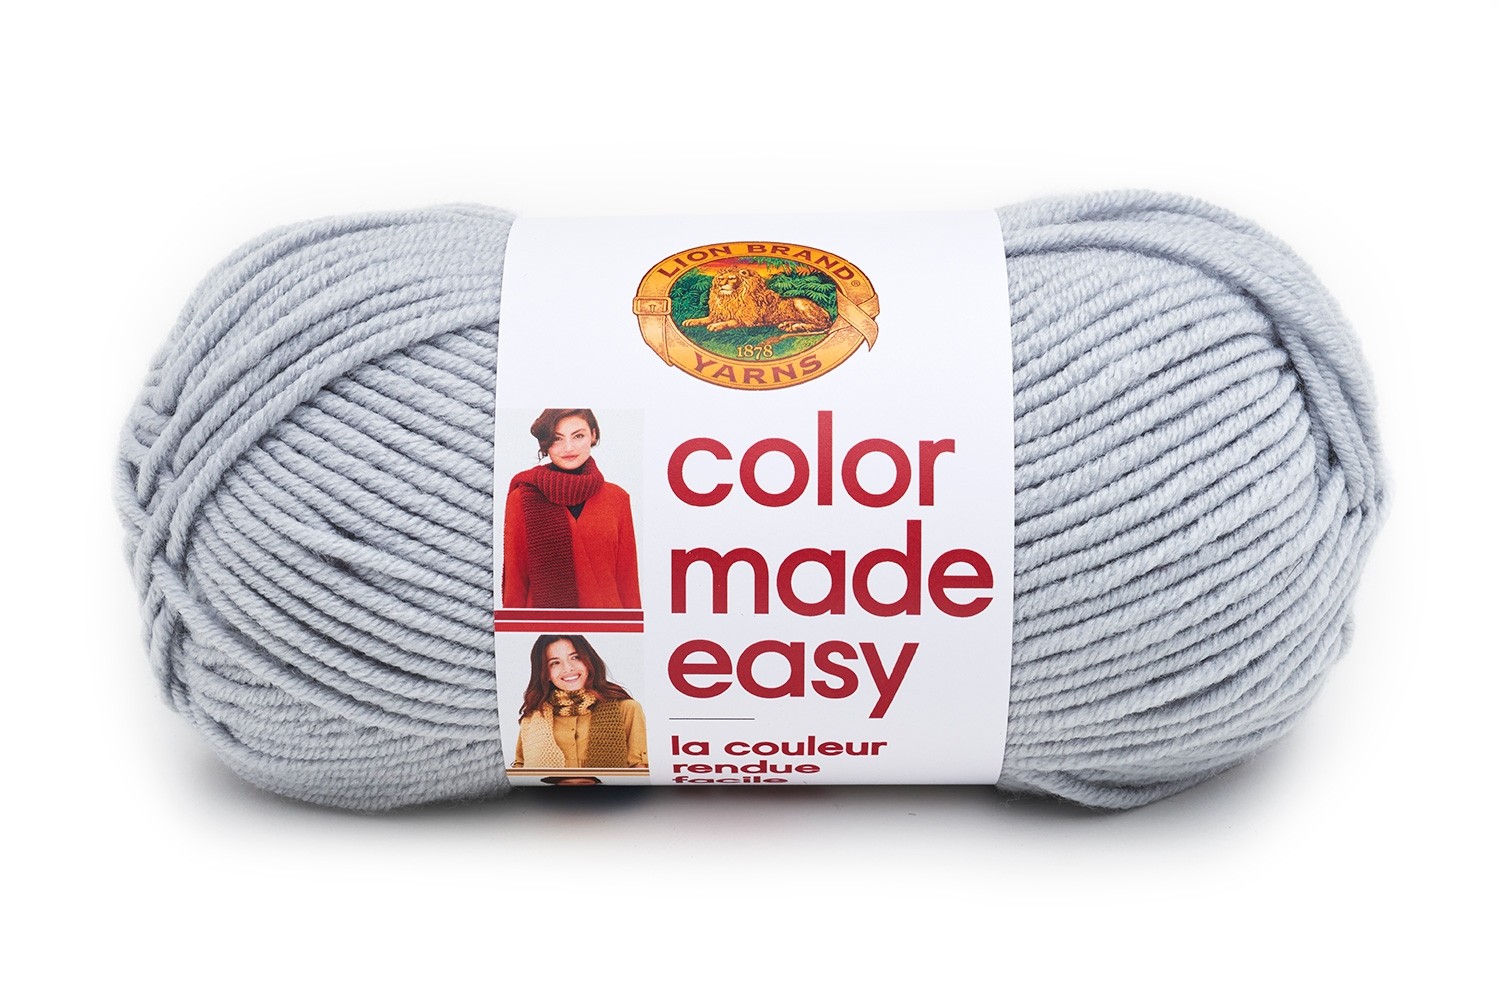 color made easy (Gray)